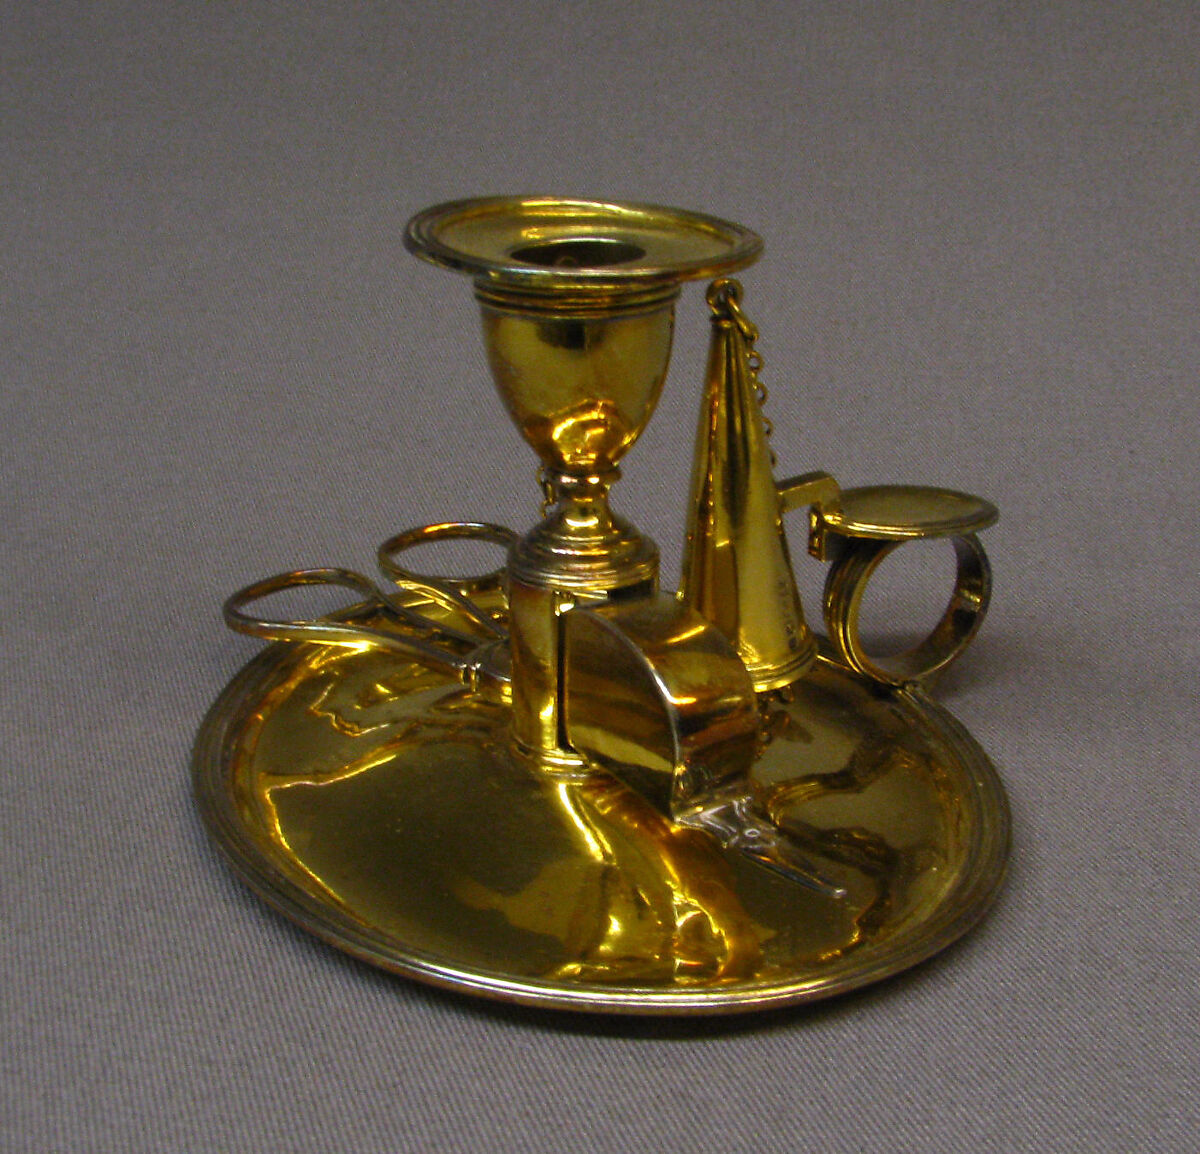 Chamber candlestick, Candlestick by John Emes (active 1796–1808), Silver gilt, British, London 